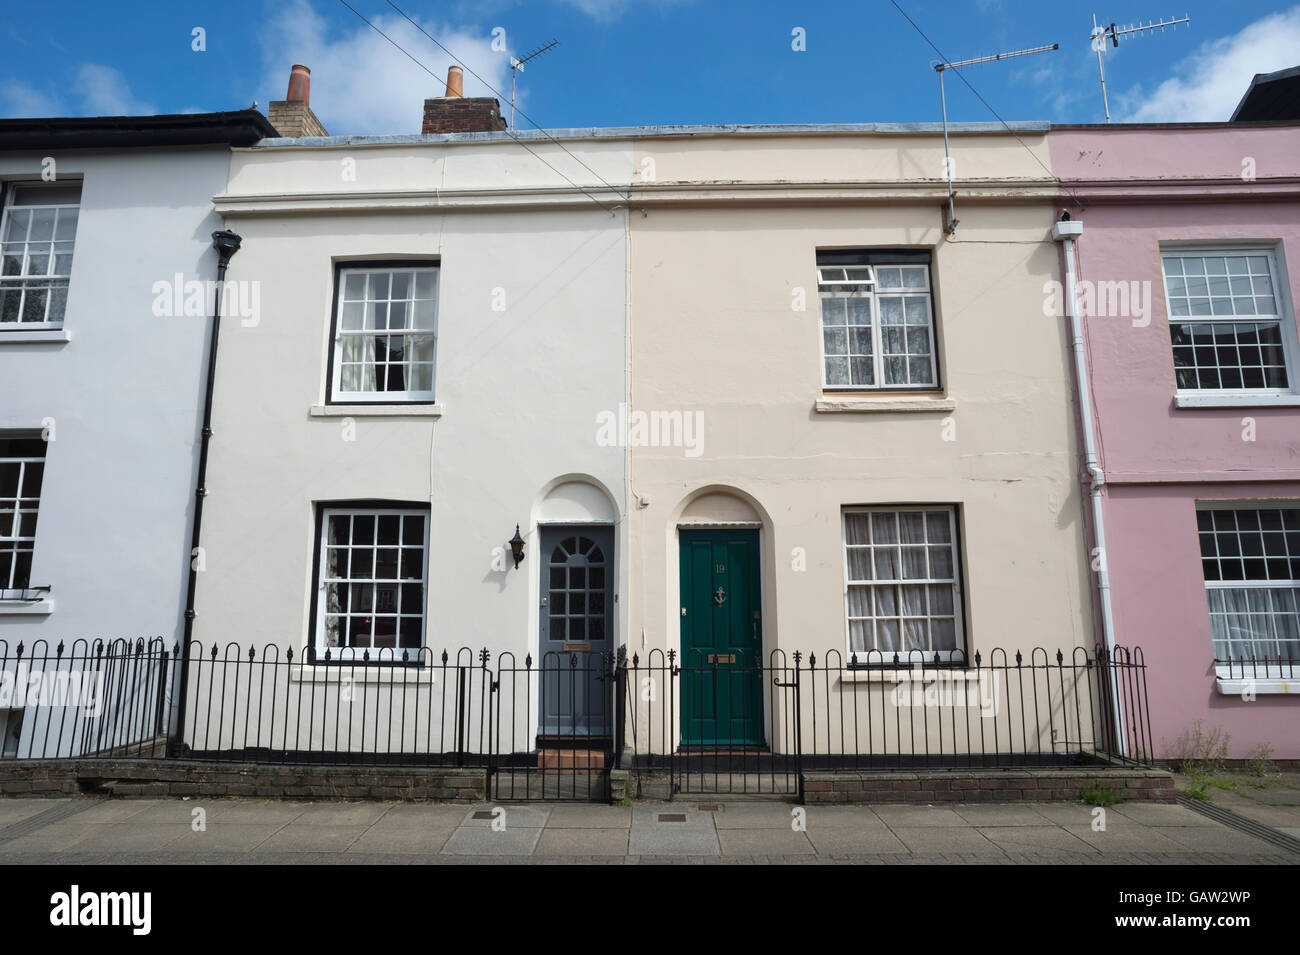 Row of painted houses Stock Photo